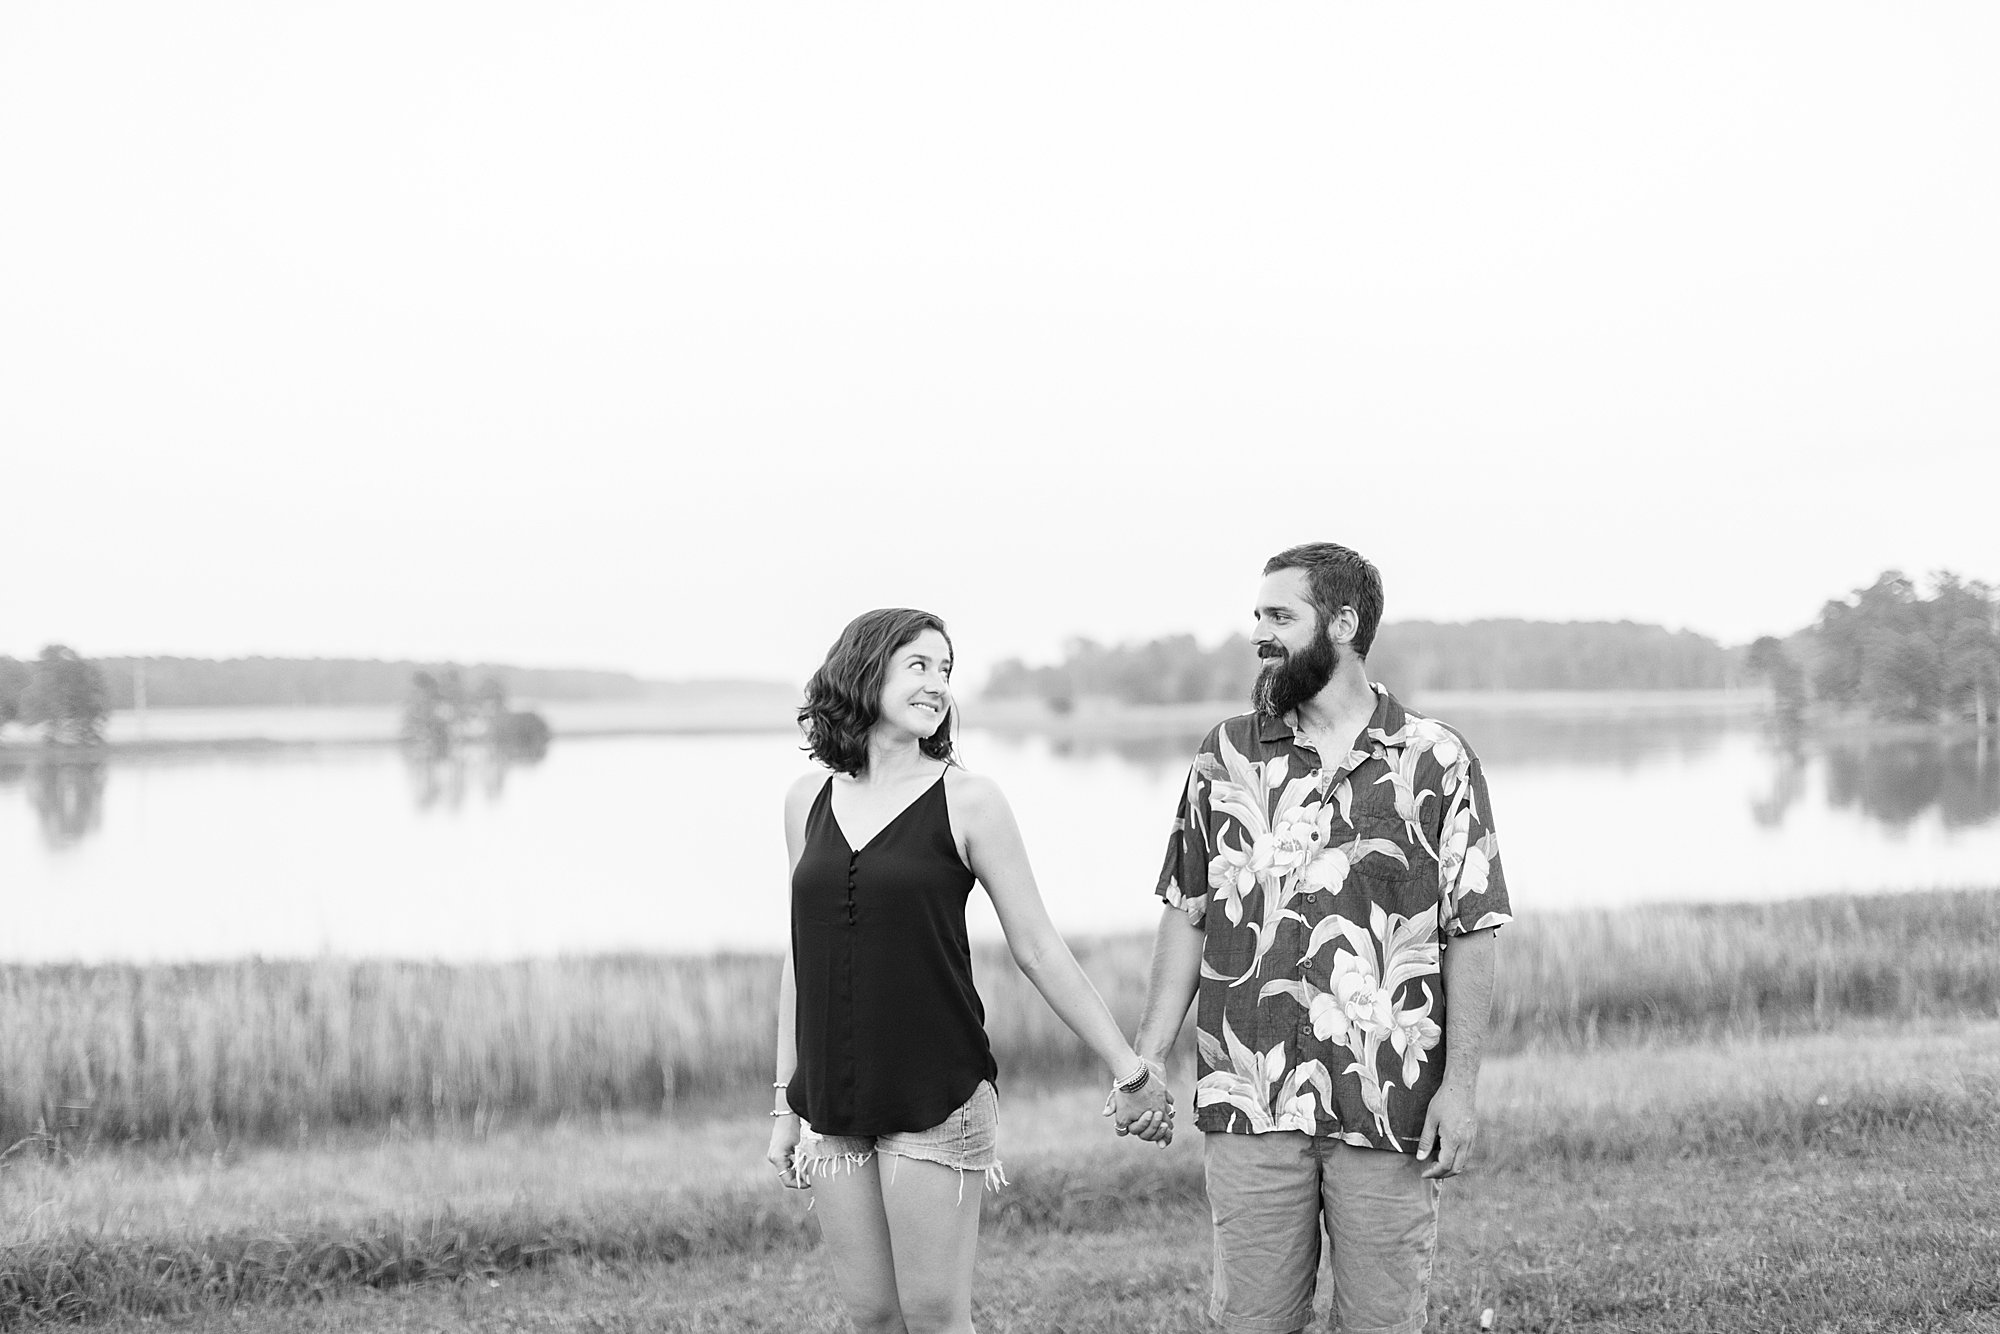 Engagement photos by Jamestown River.